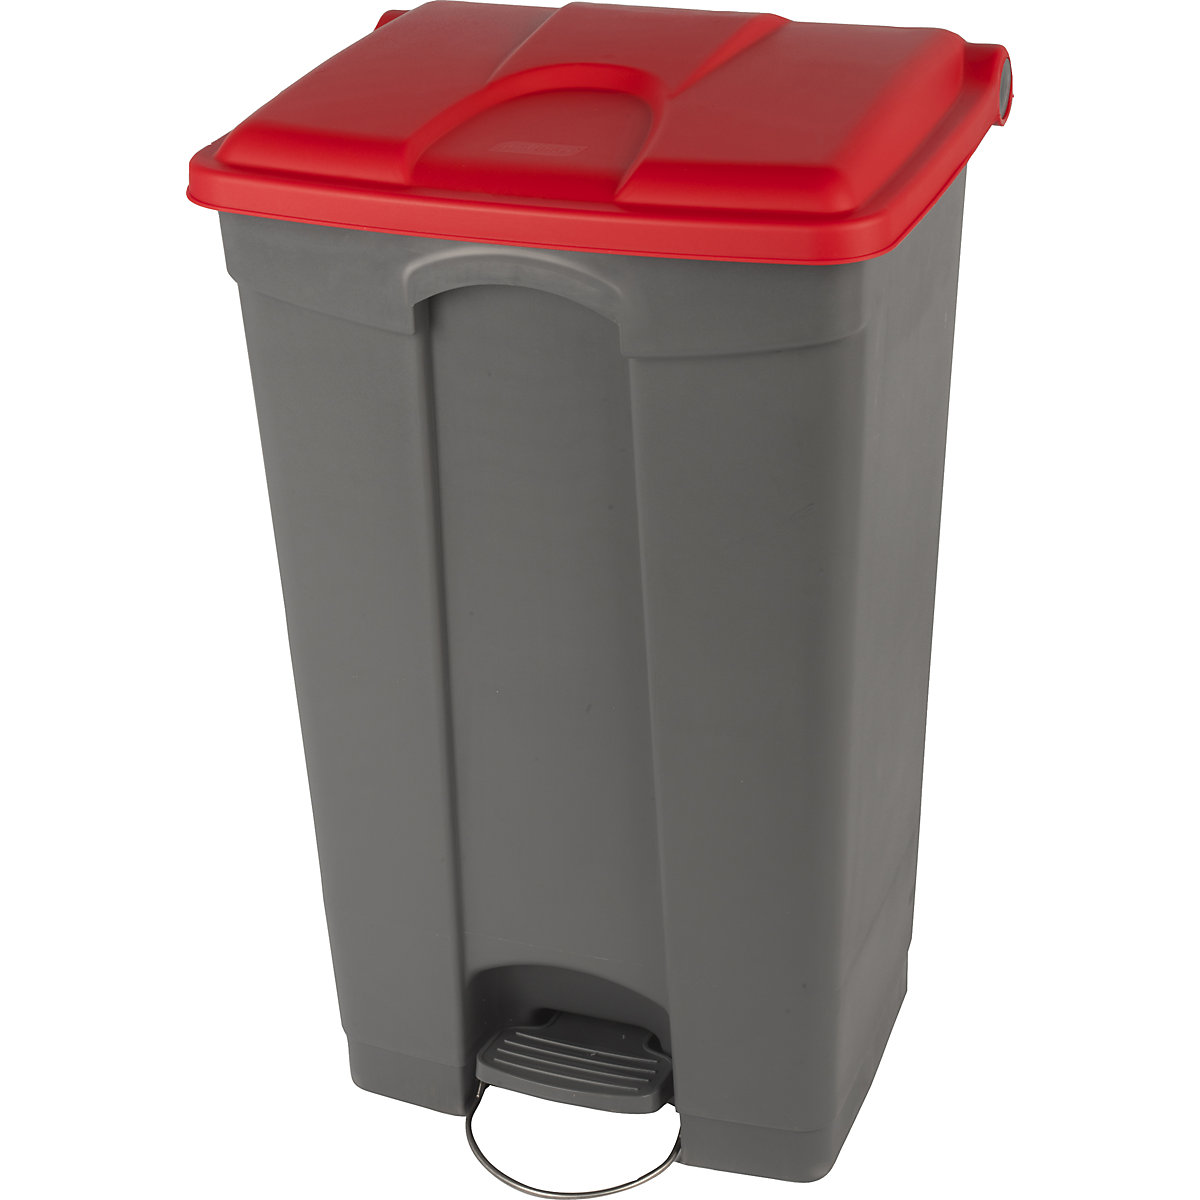 EUROKRAFTbasic – Pedal waste collector, capacity 90 l, WxHxD 505 x 790 x 410 mm, grey, red lid